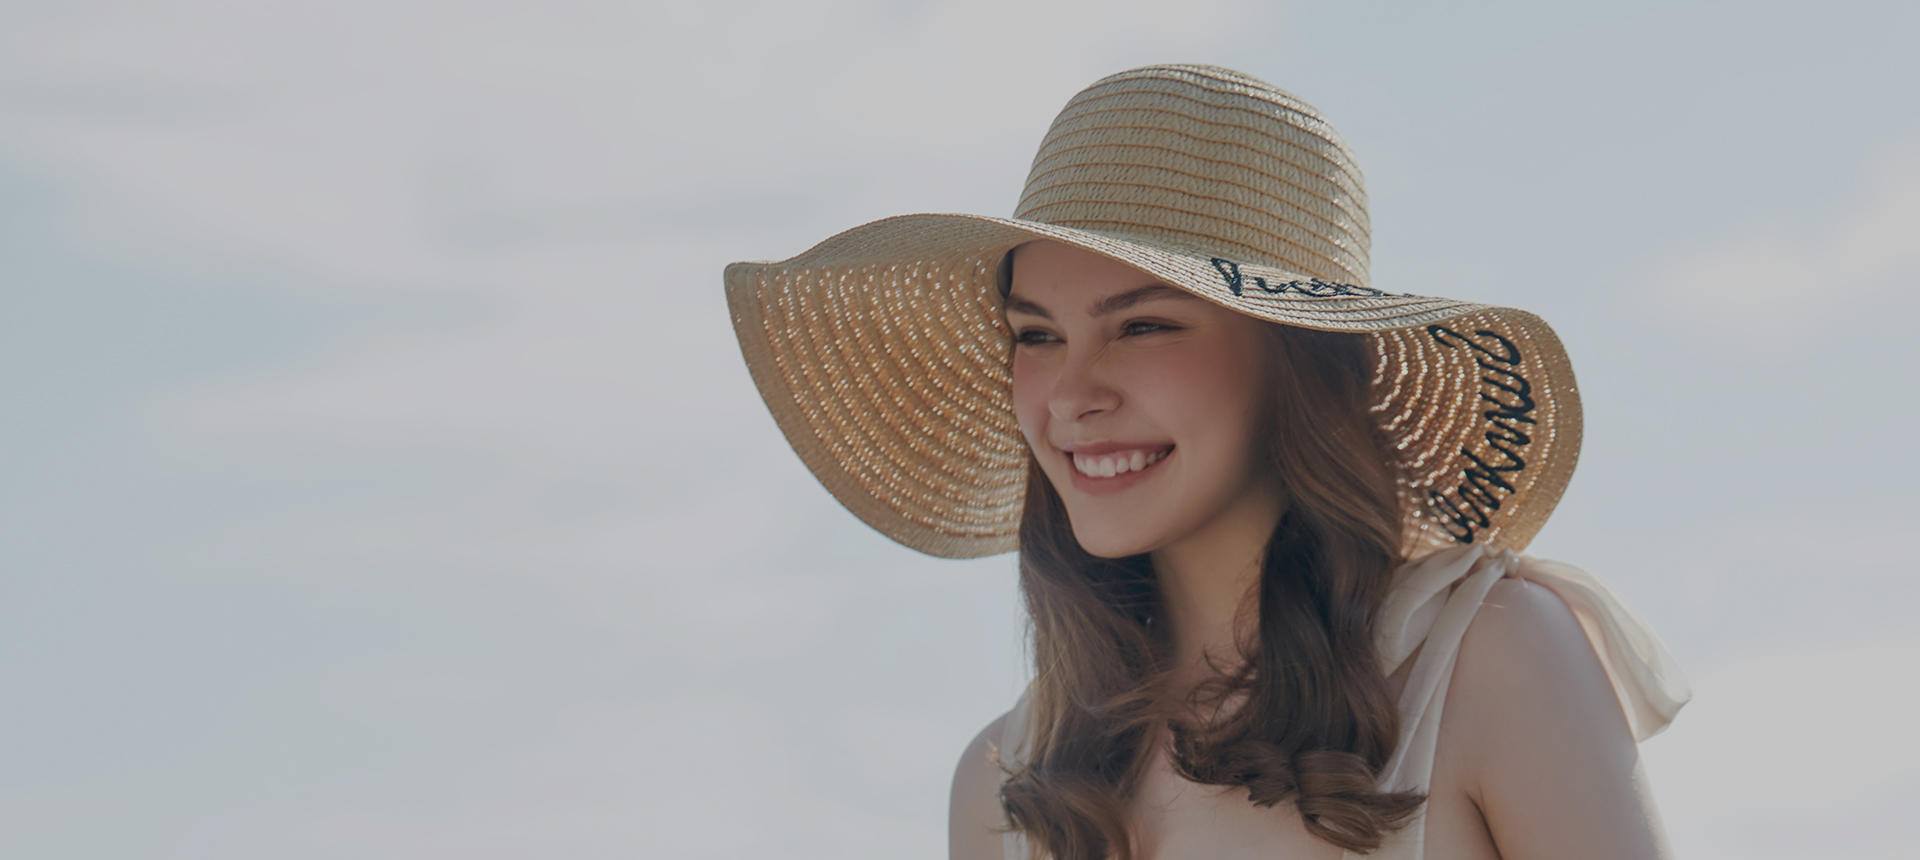 The Sun Hat: A Versatile Accessory for Sun Protection and Style